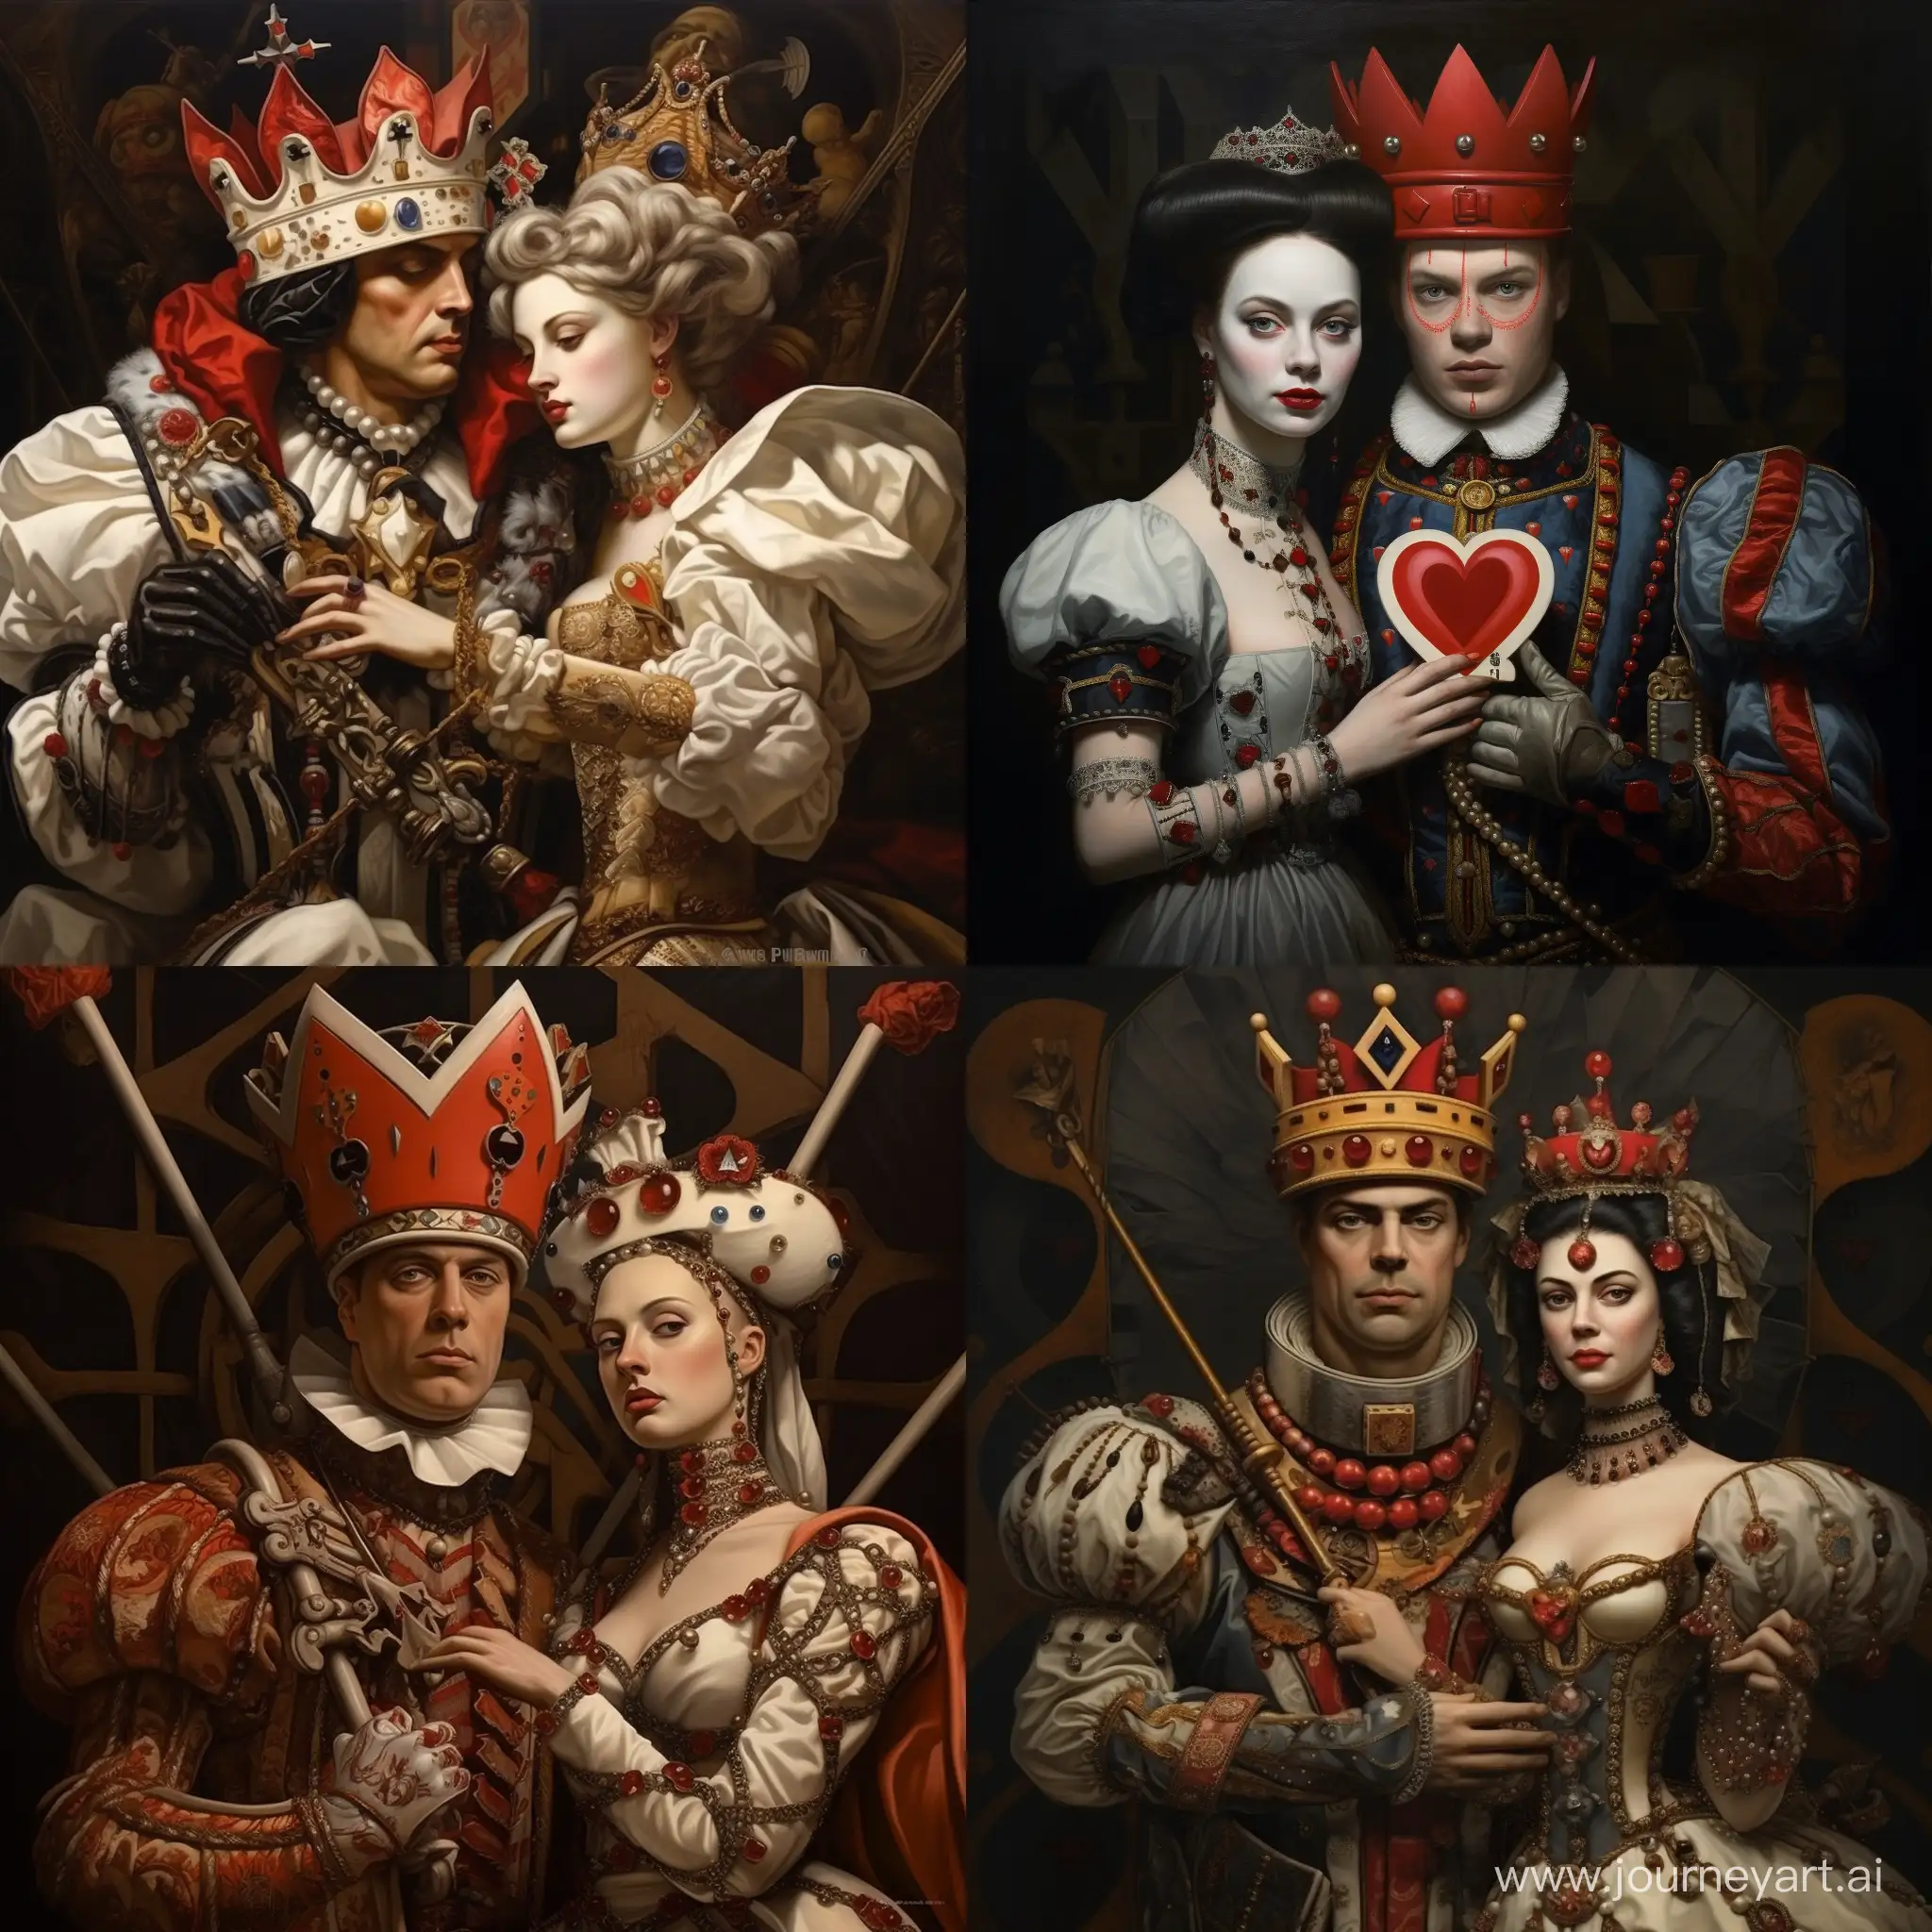 Regal-Absence-Cross-King-and-Queen-of-Hearts-in-HighArt-Departure